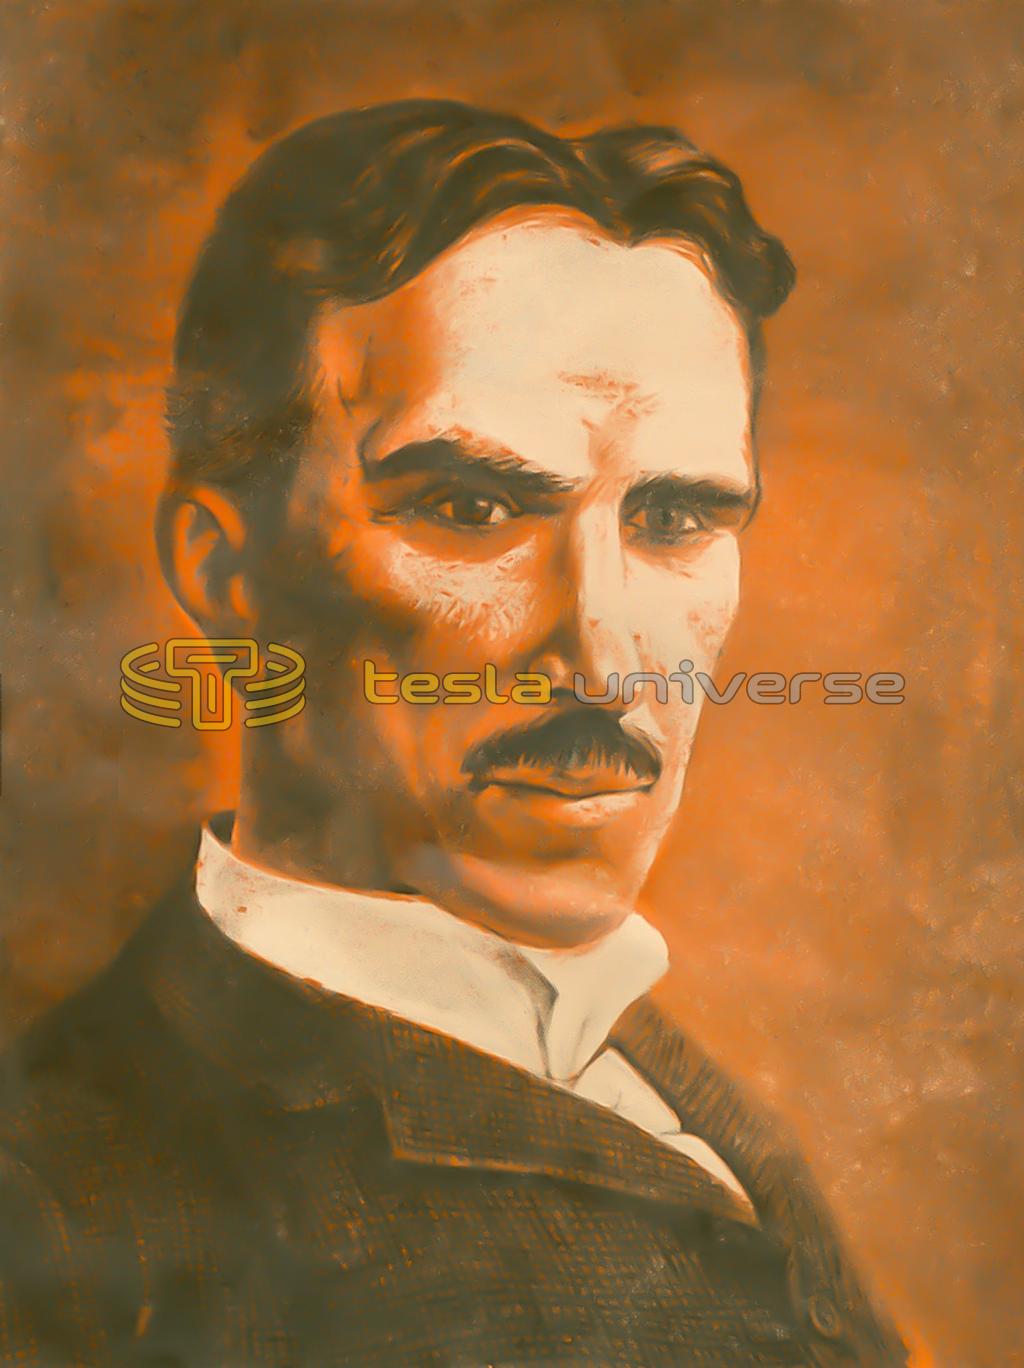 A drawing of Nikola Tesla in a rather serious looking pose